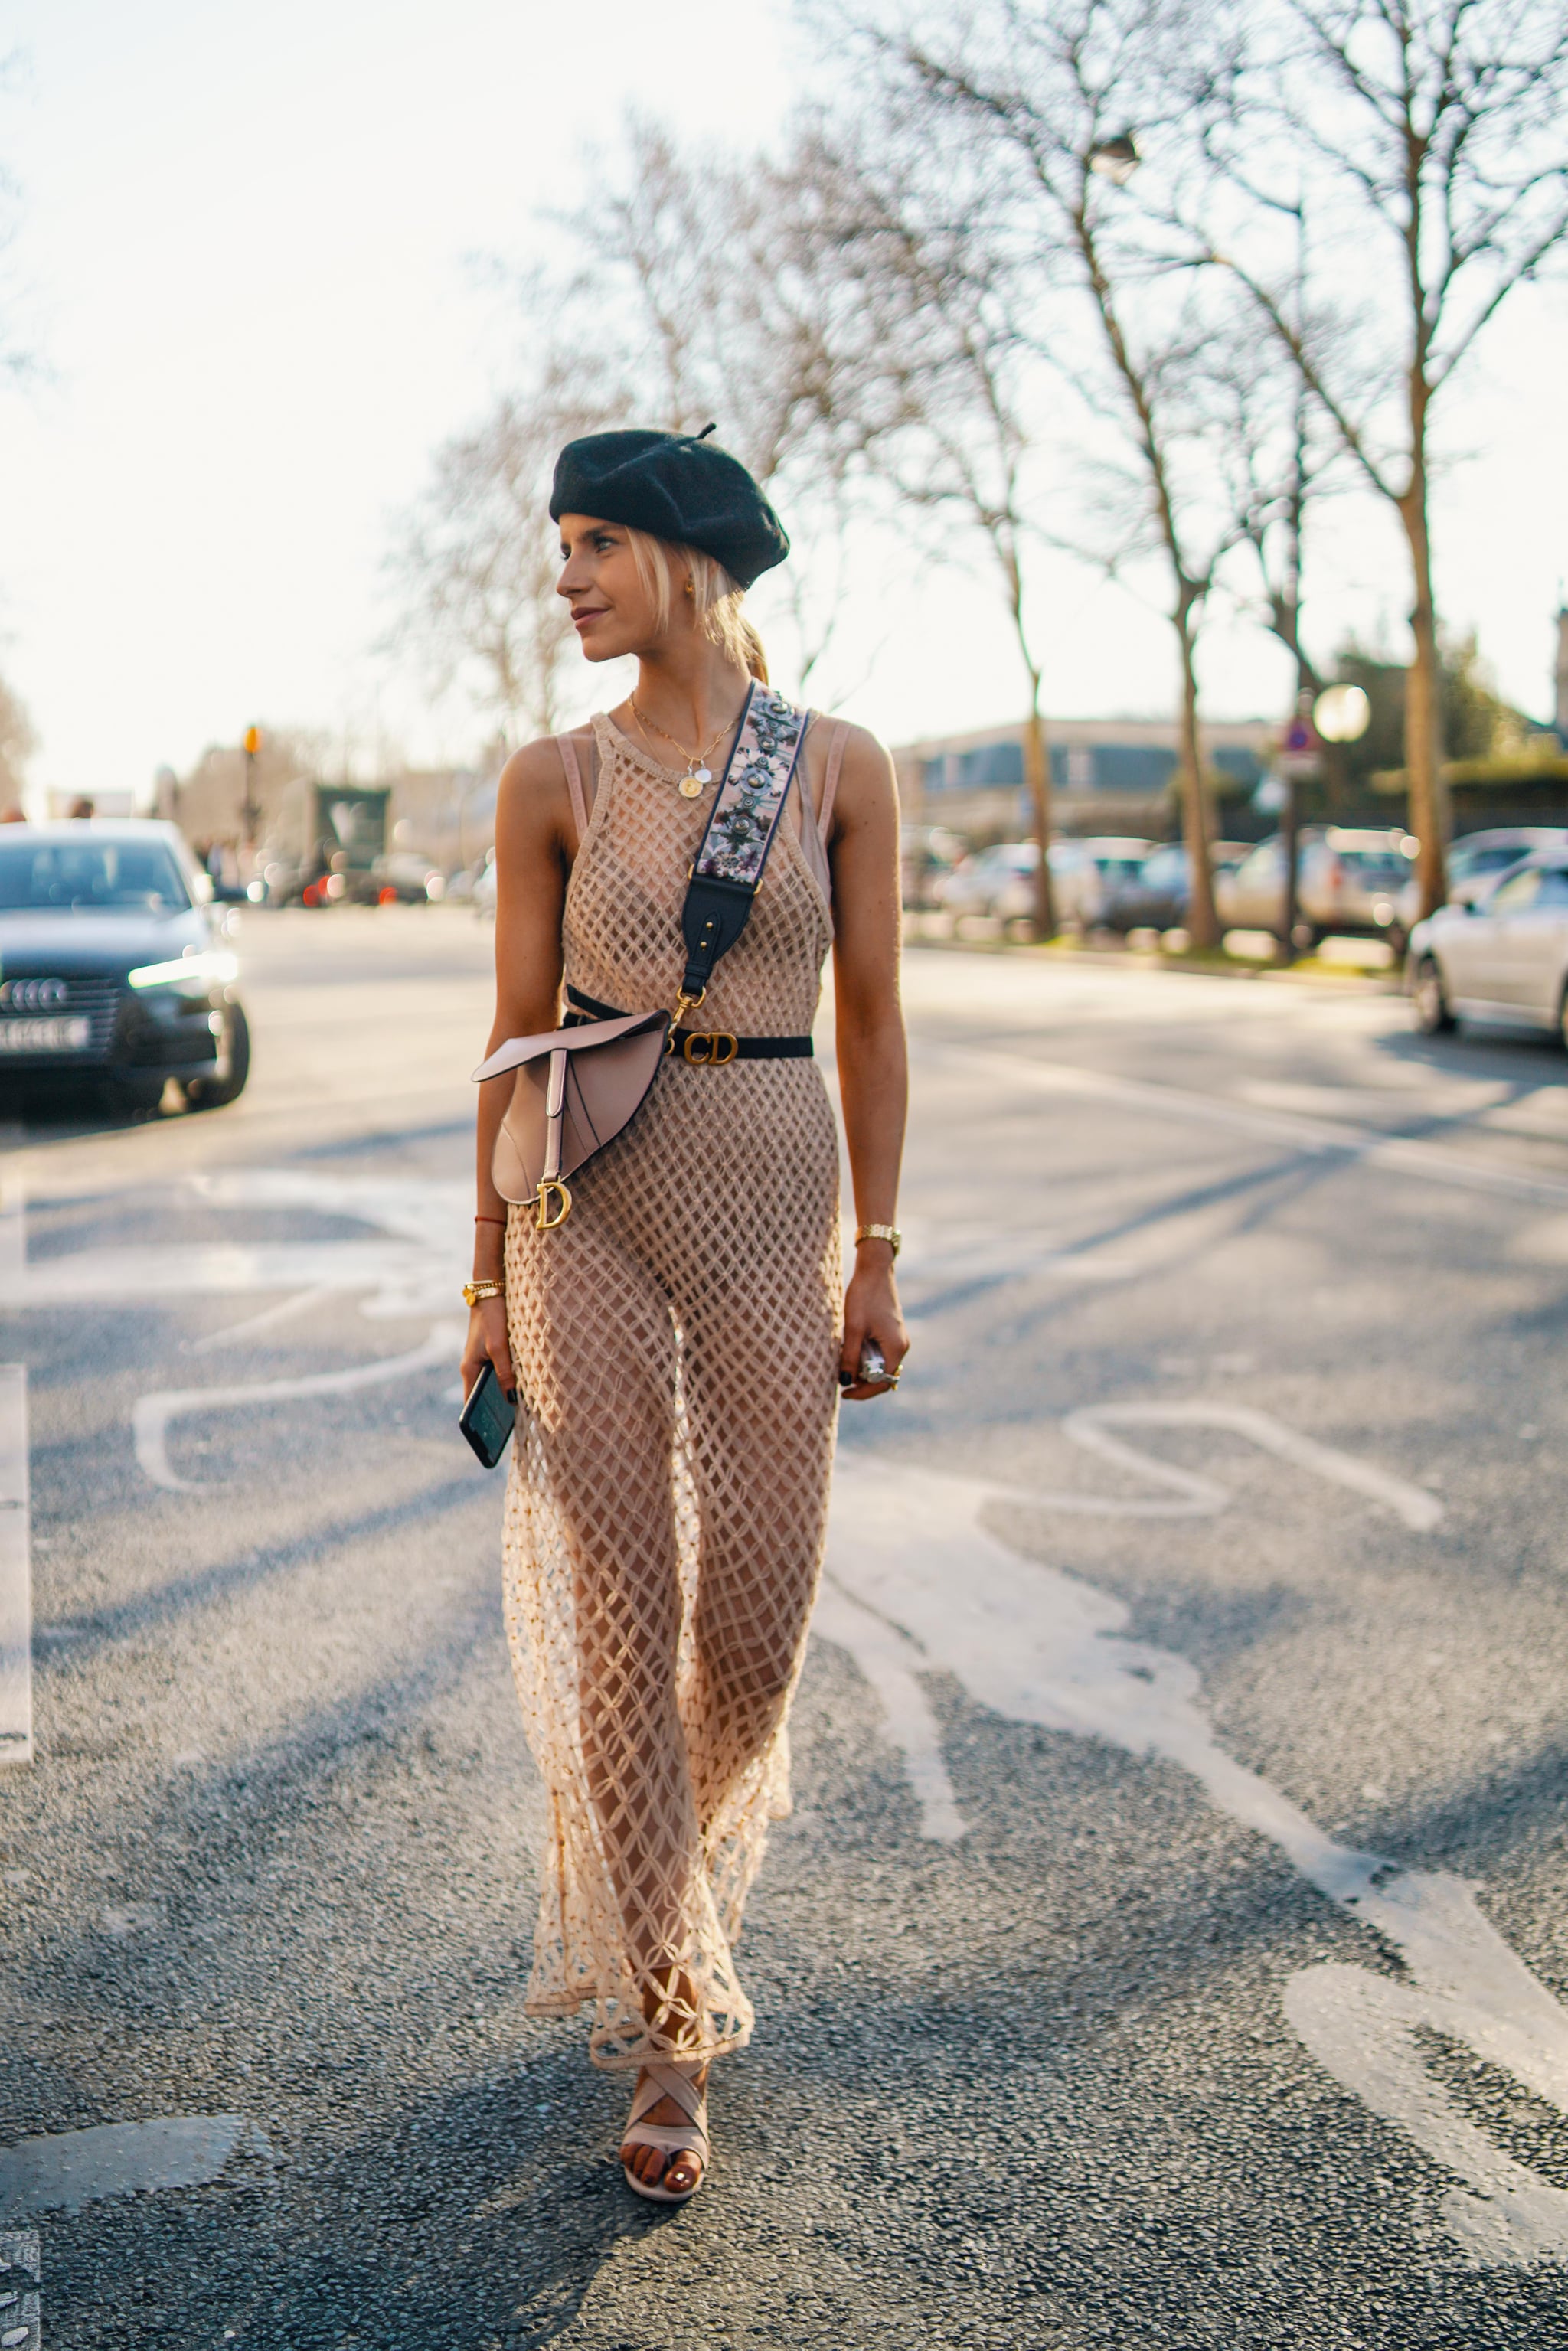 Dare to wear a sheer crochet dress with a bodysuit., This Is How You  Should Be Styling Your Maxi Dress This Season, According to Street Style  Stars